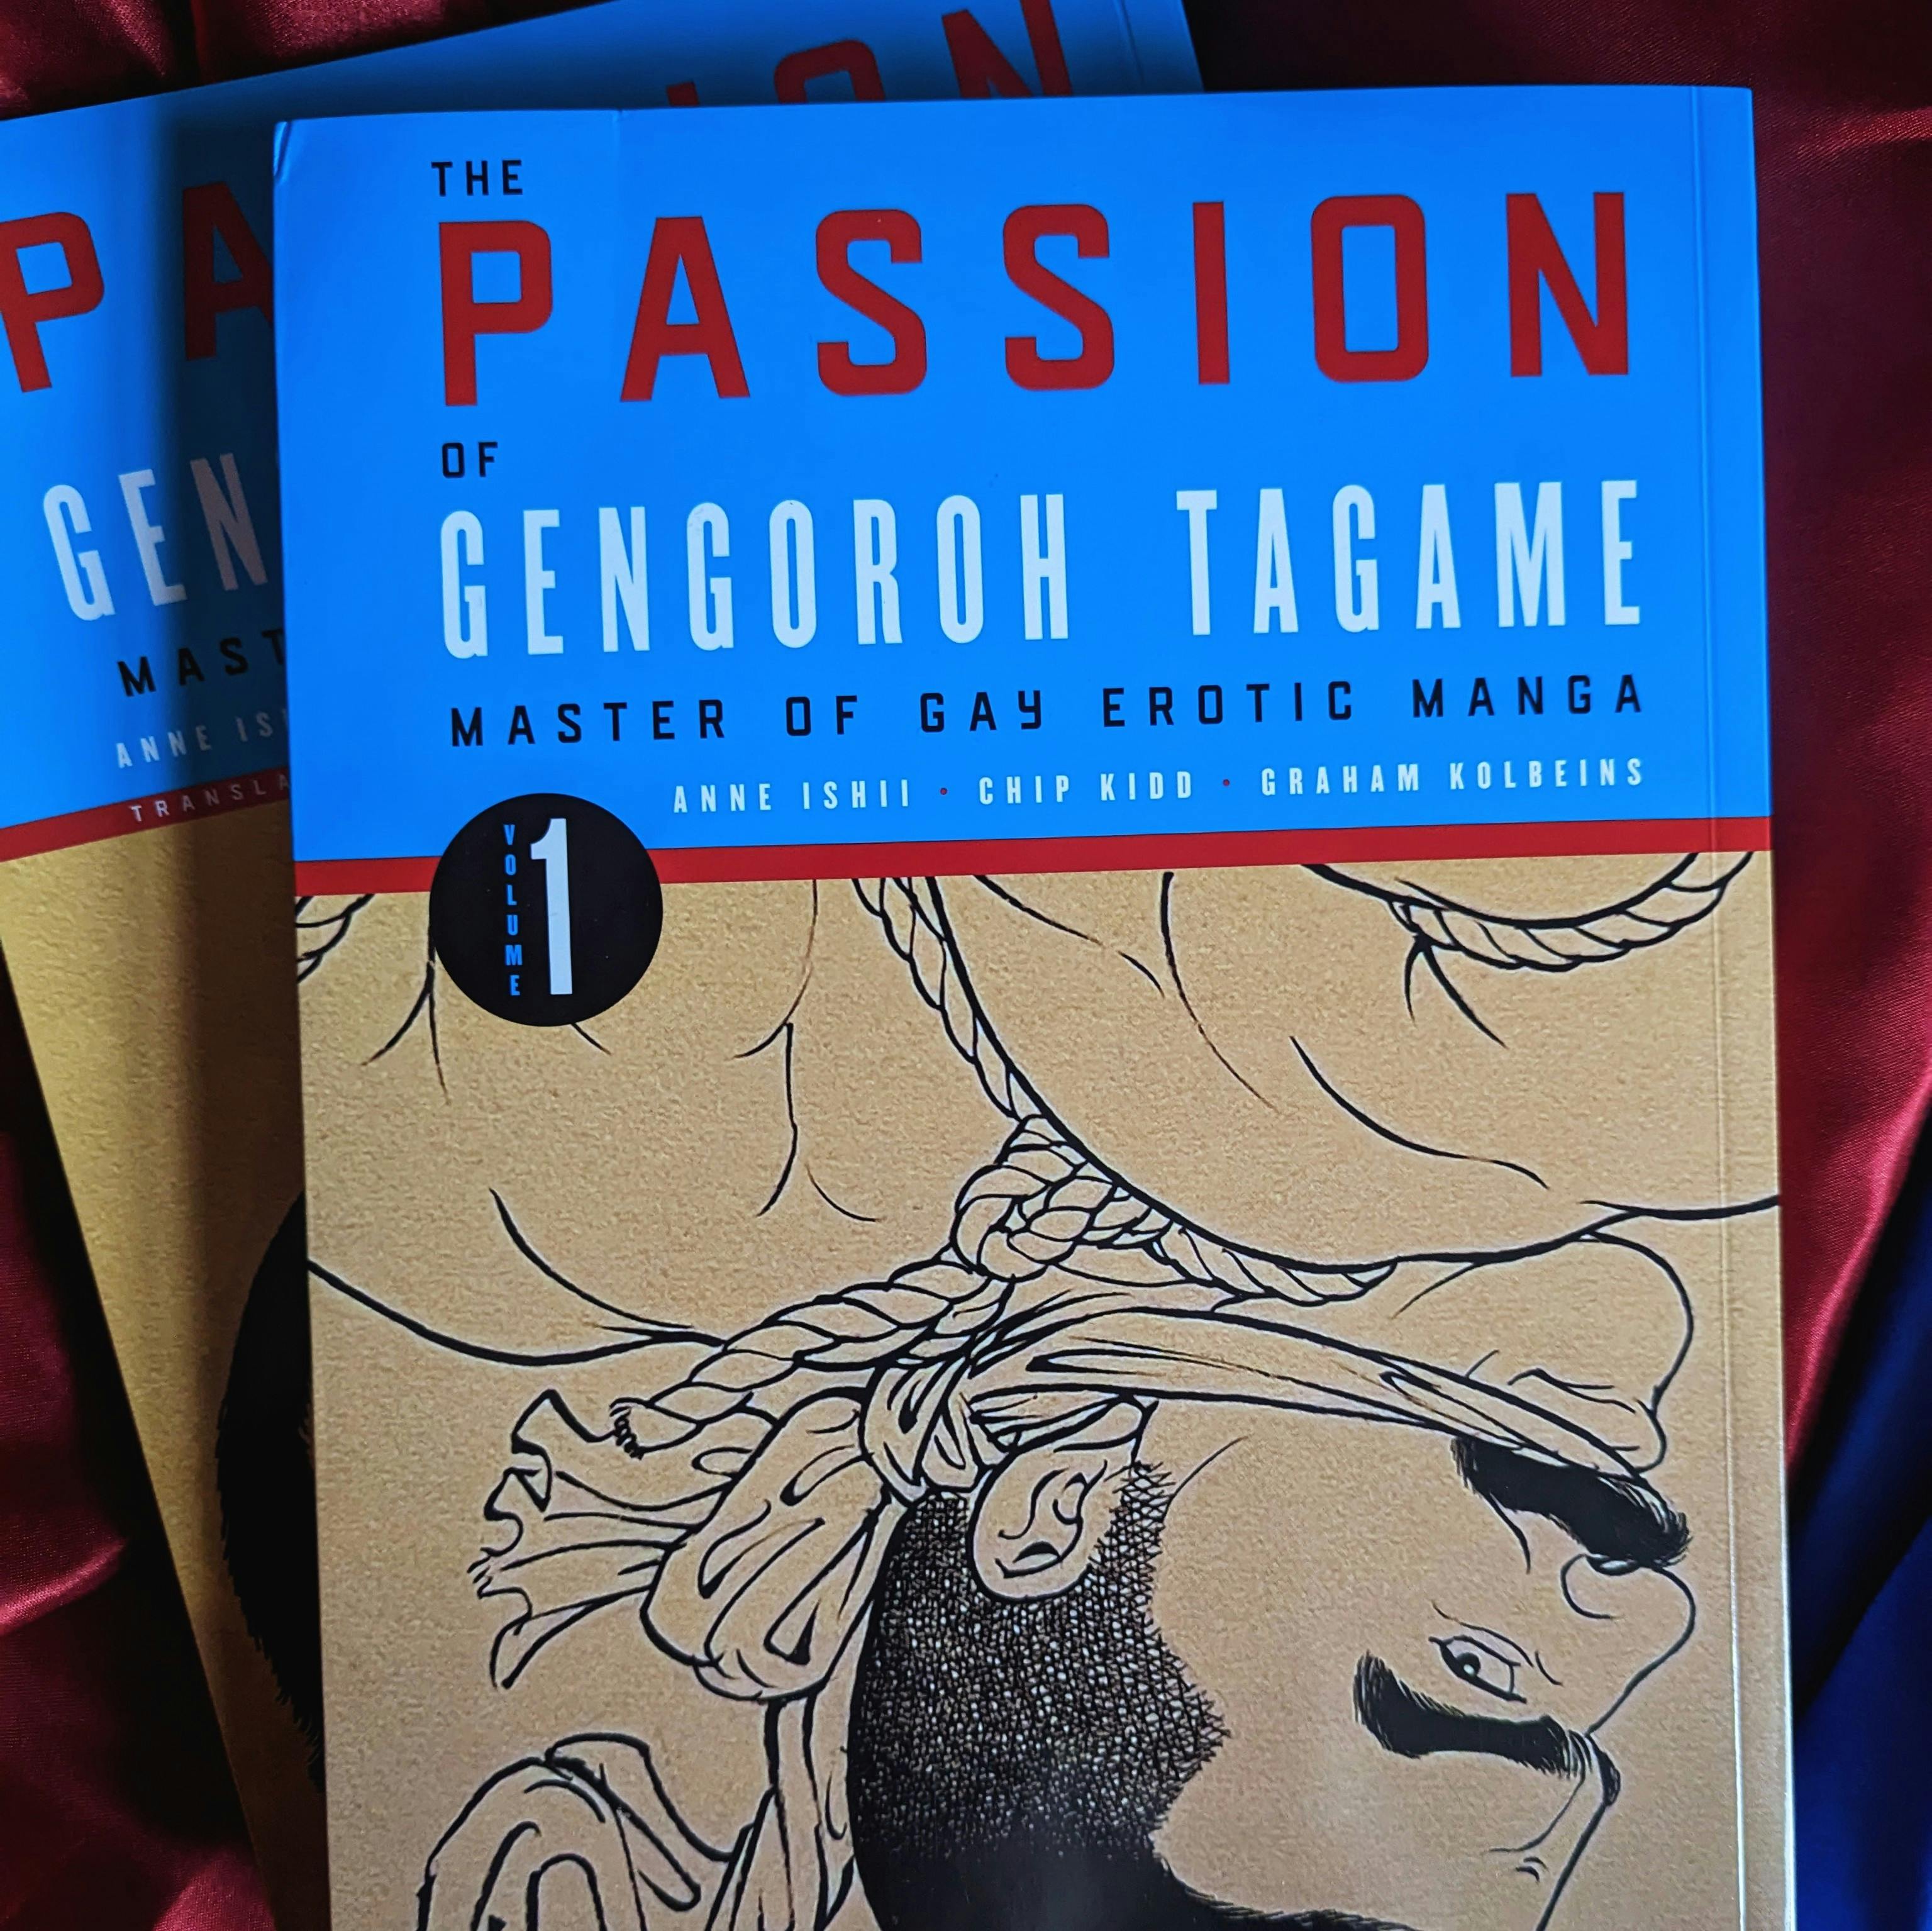 book cover of the Passion of Gengoroh Tagame; shows beefy man bound and gagged